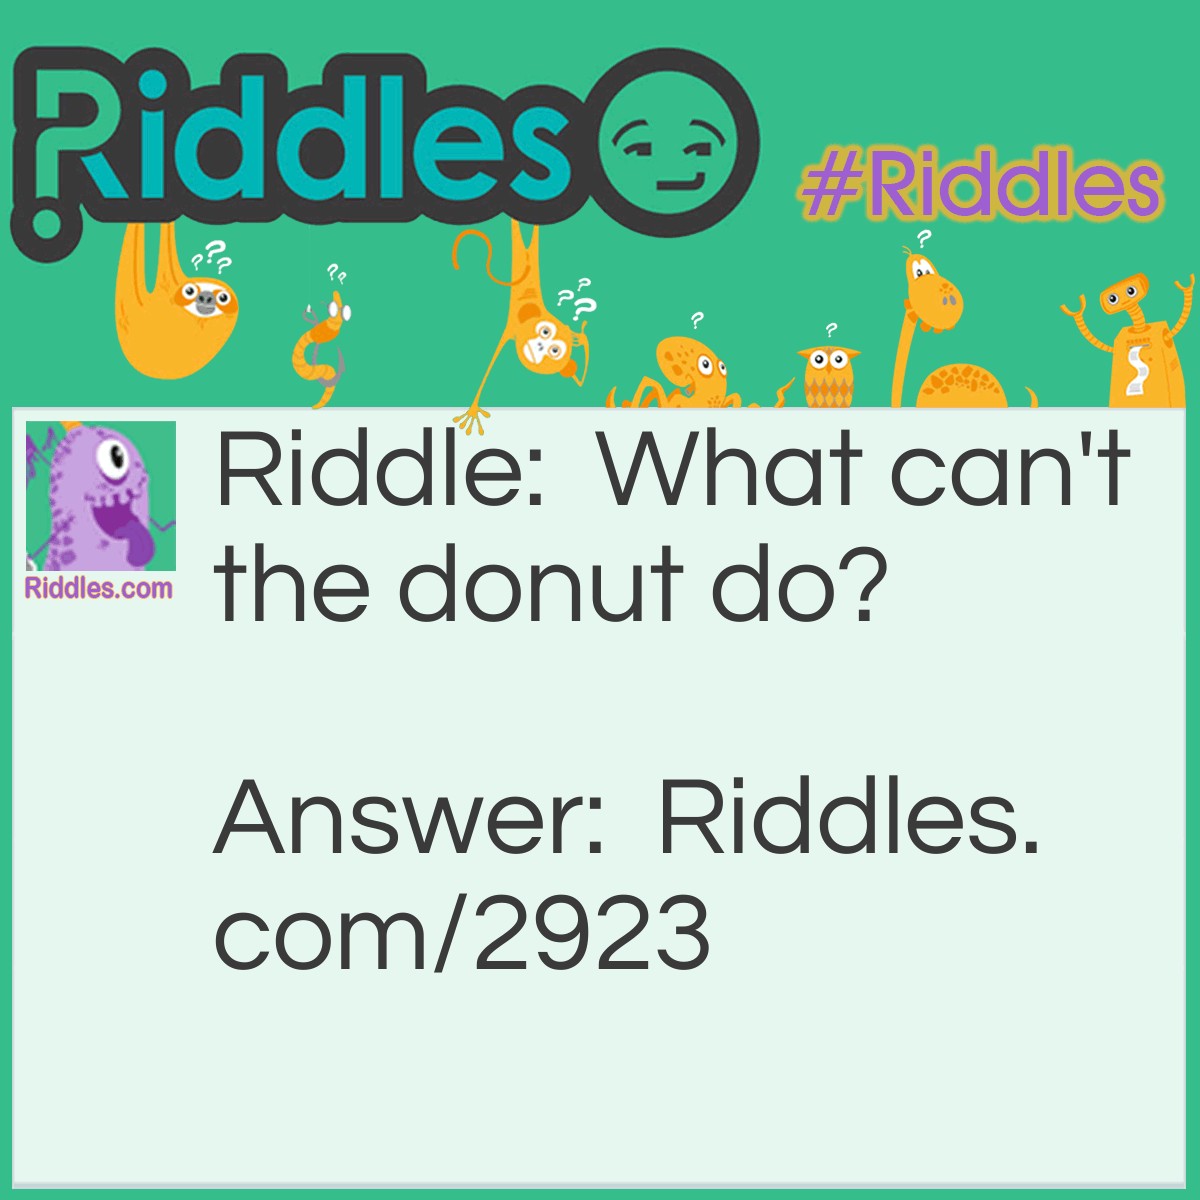 Riddle: What can't the donut do? Answer: The donut, can't do-nut.